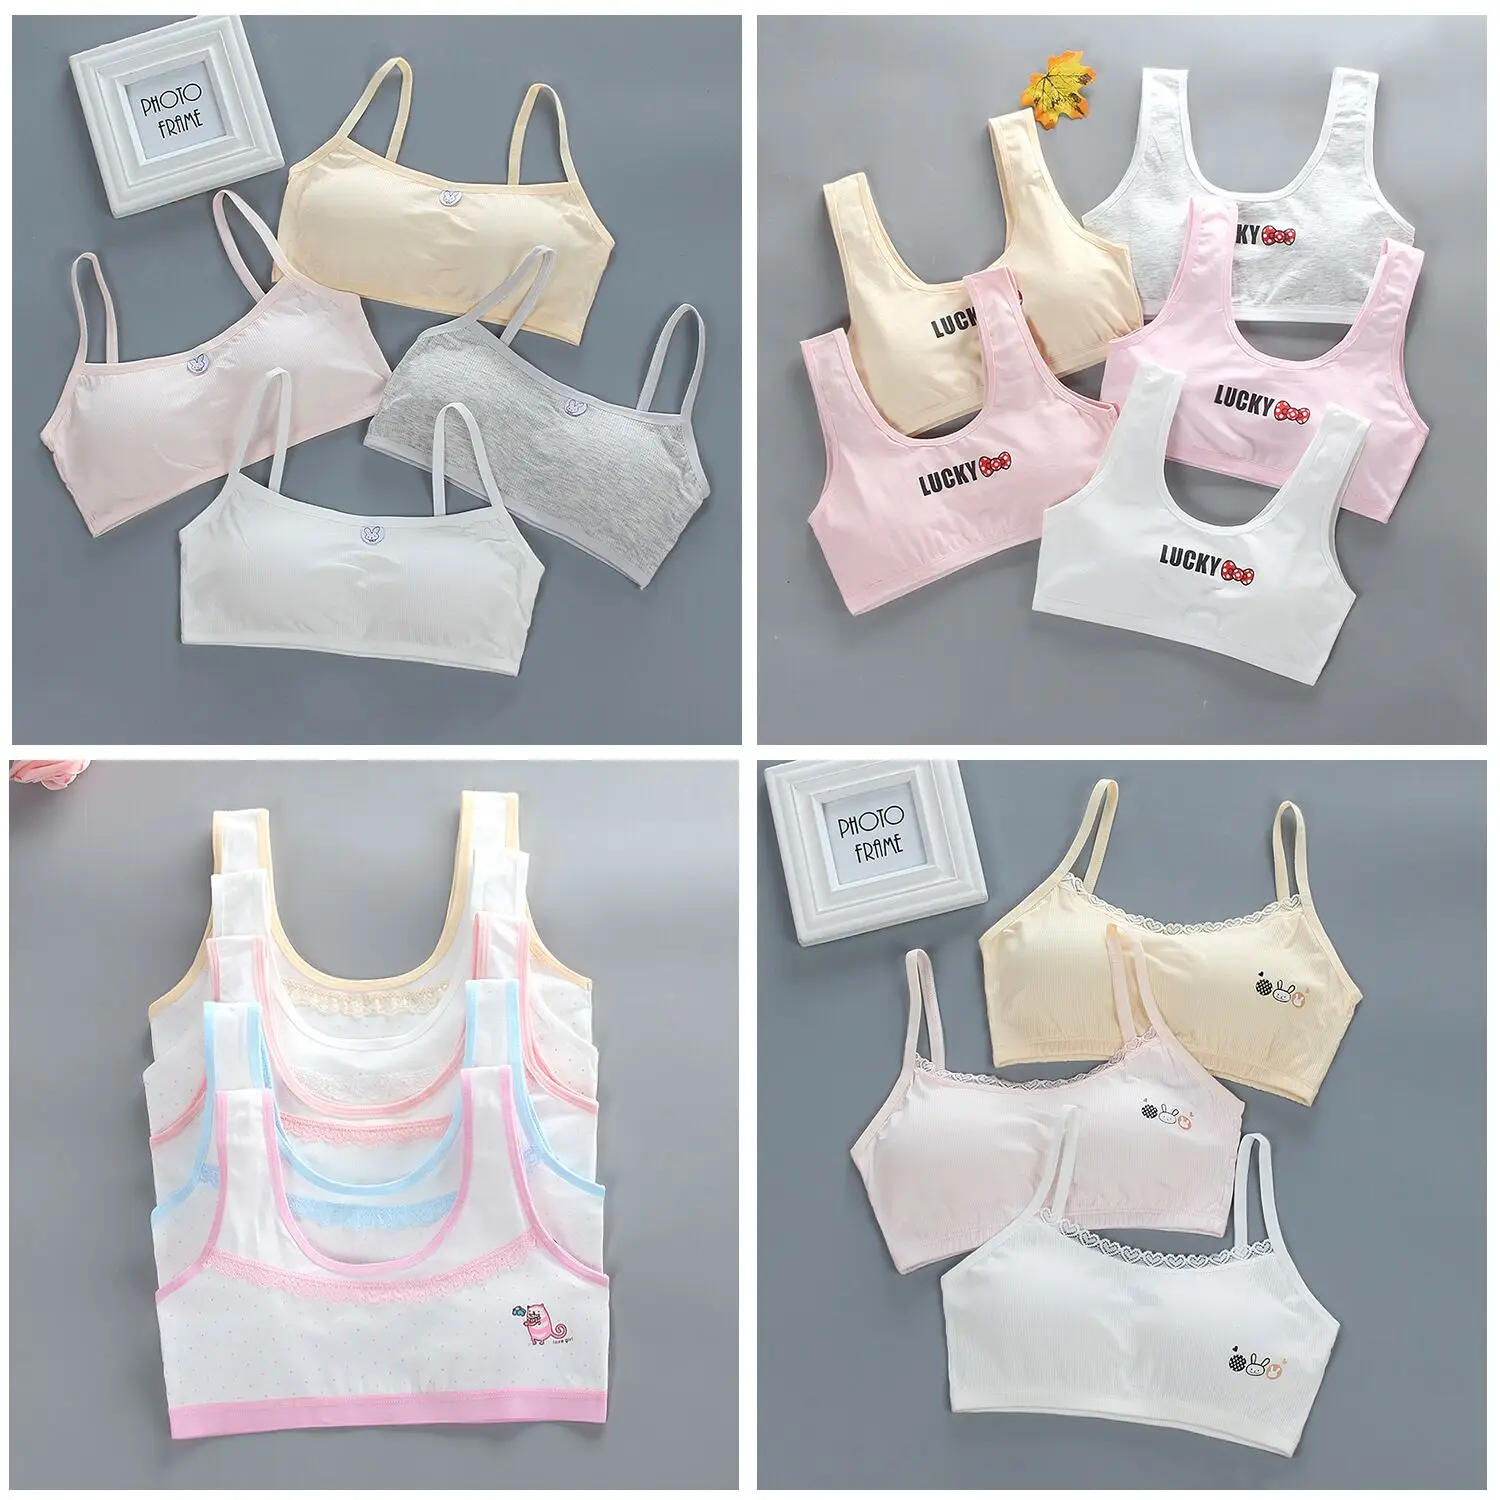 

3pcs/set Young Girls Solid Soft Cotton Bra Puberty Teenage Breathable Underwear Sport Training Bras 8-14Years